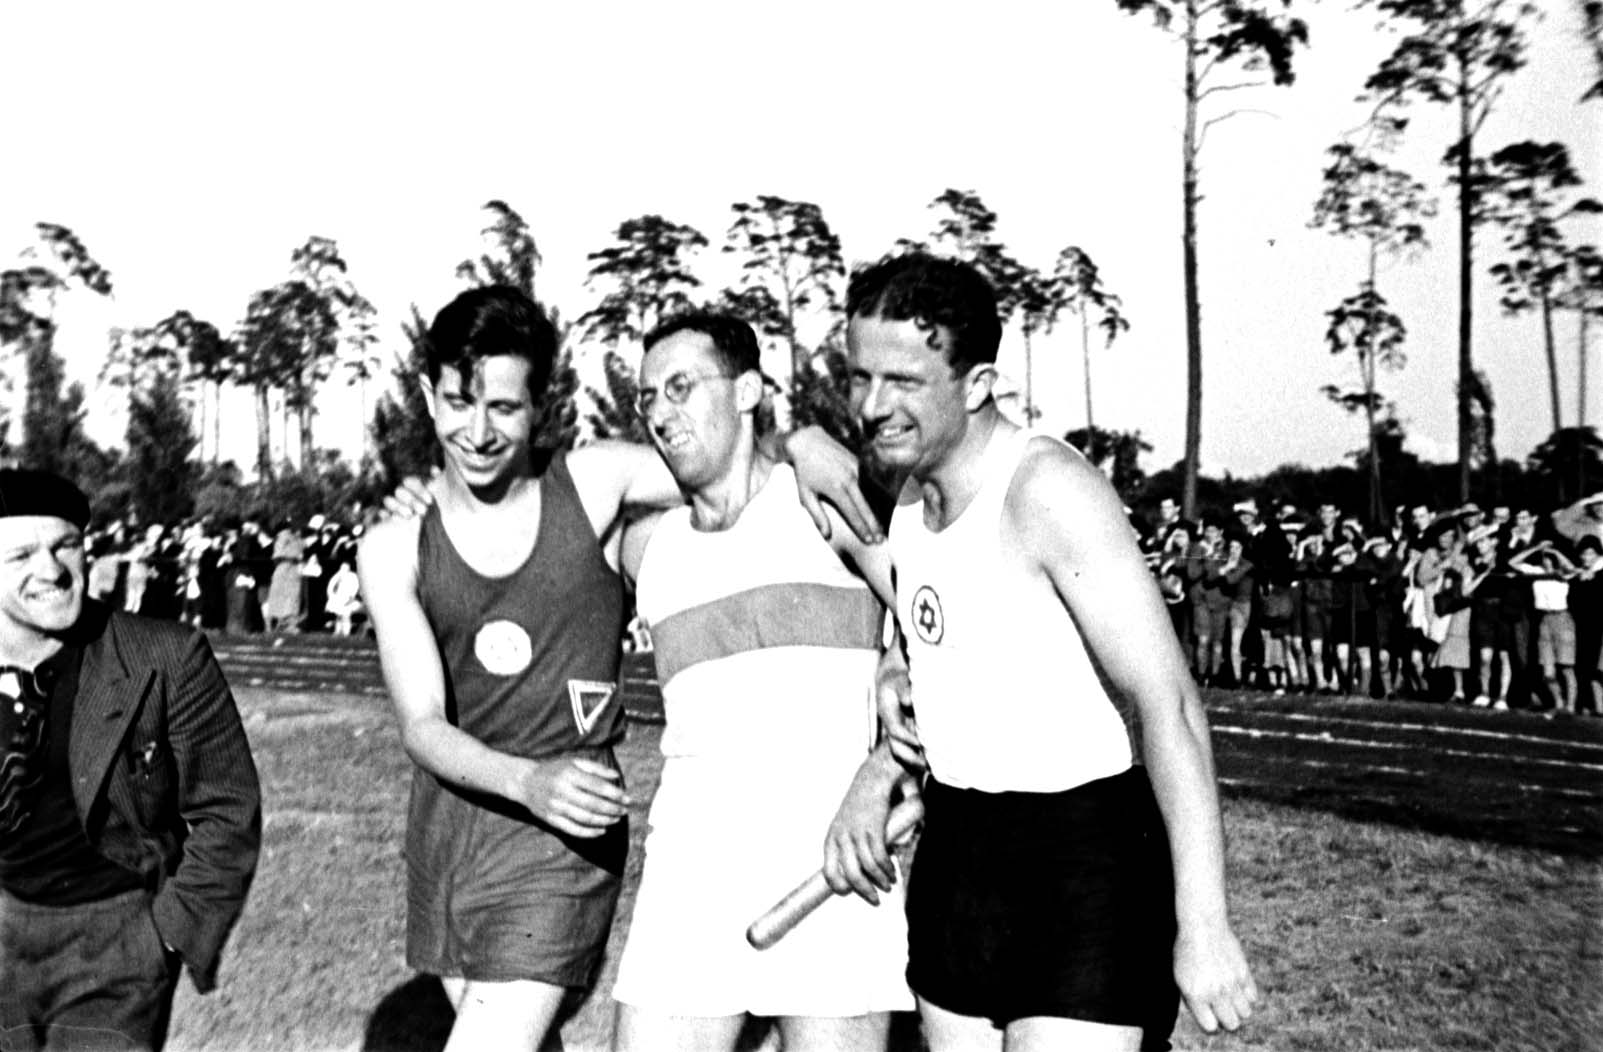 Track and field athletes at the Maccabi Berlin International Sports Day. Berlin, Germany, 16/6/1935. From left to right: Orgler, Dreyer and Frankenstein